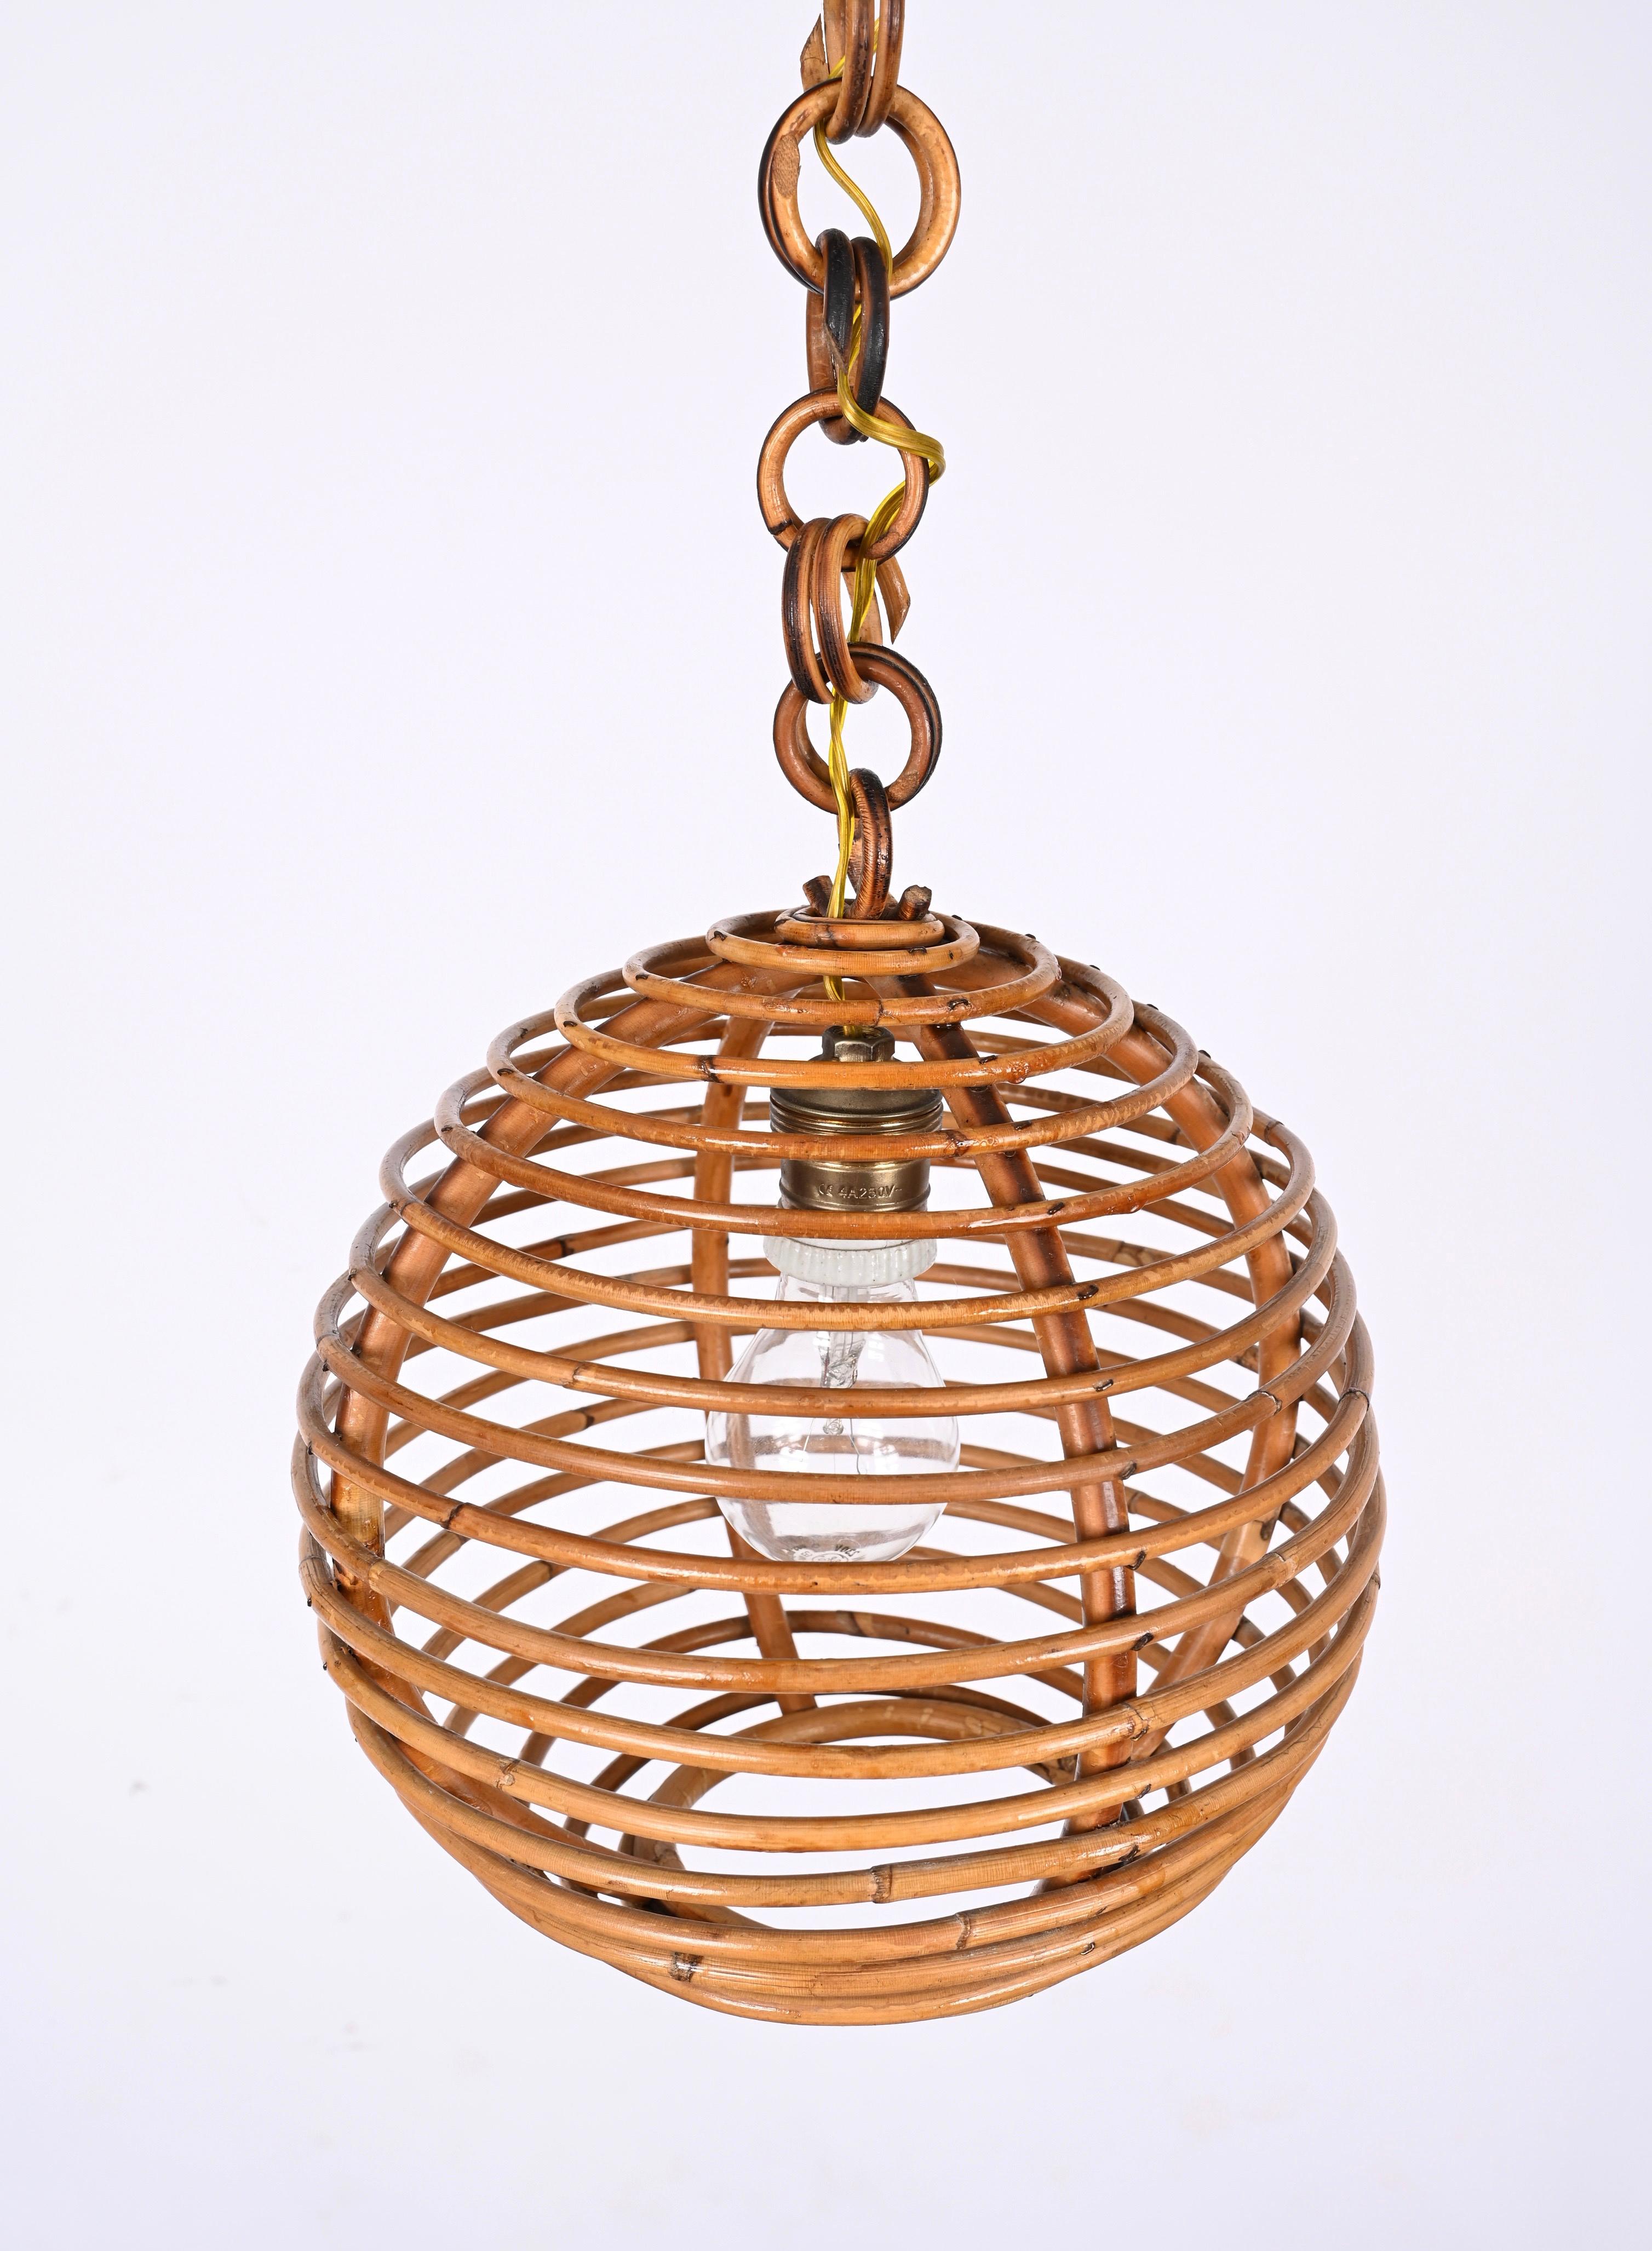 Midcentury French Riviera Bambo and Rattan Spherical Italian Chandelier, 1960s For Sale 9